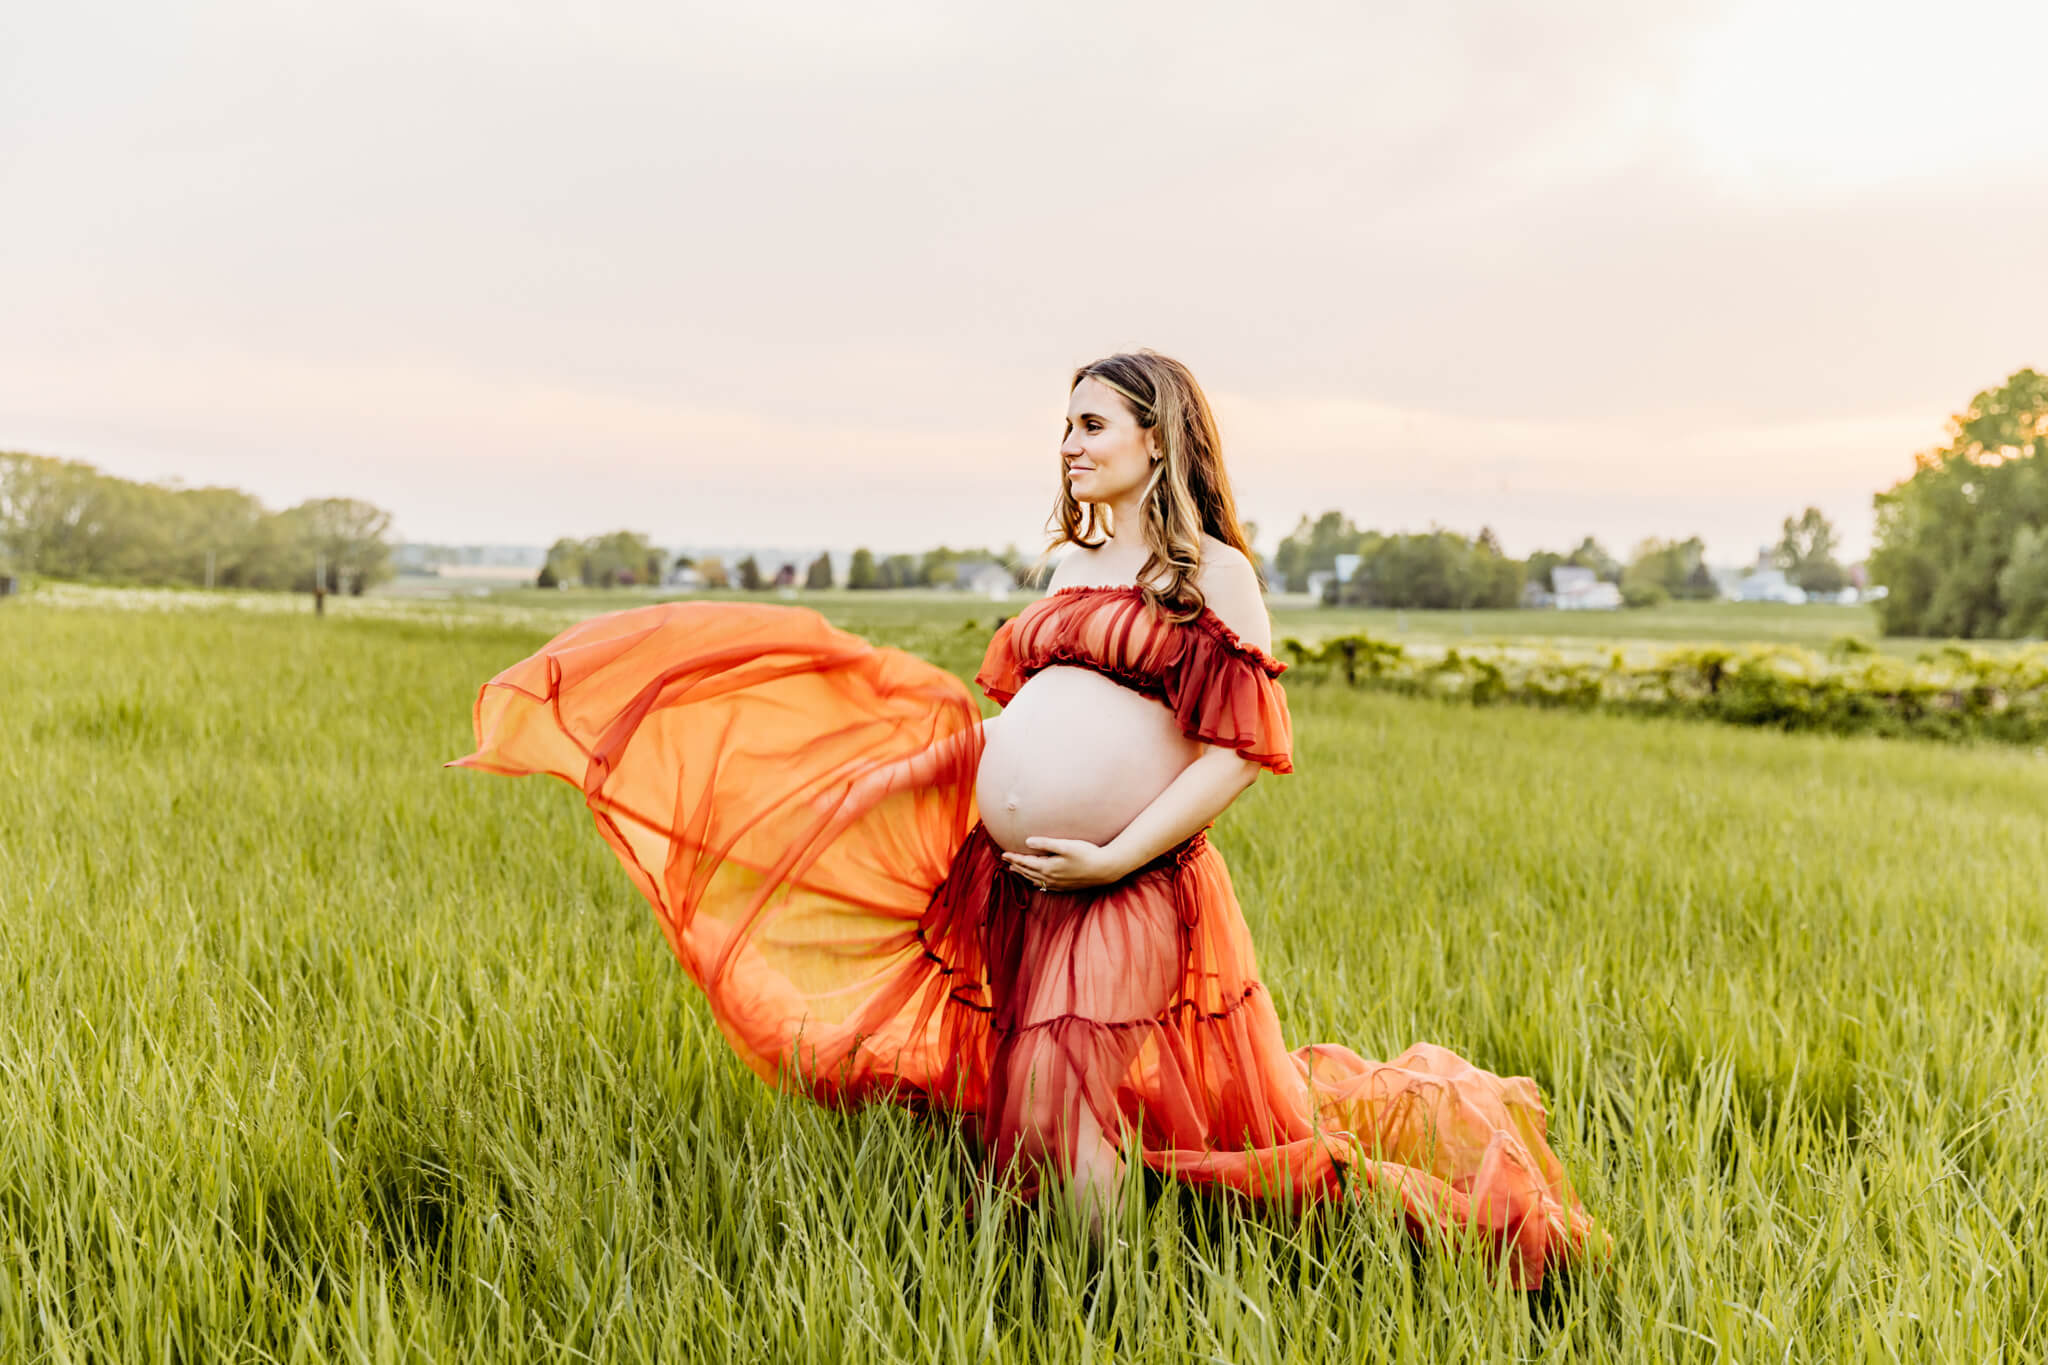 mom to be throwing her orange skirt into the wind as the sun sets behind her in a beautiful field